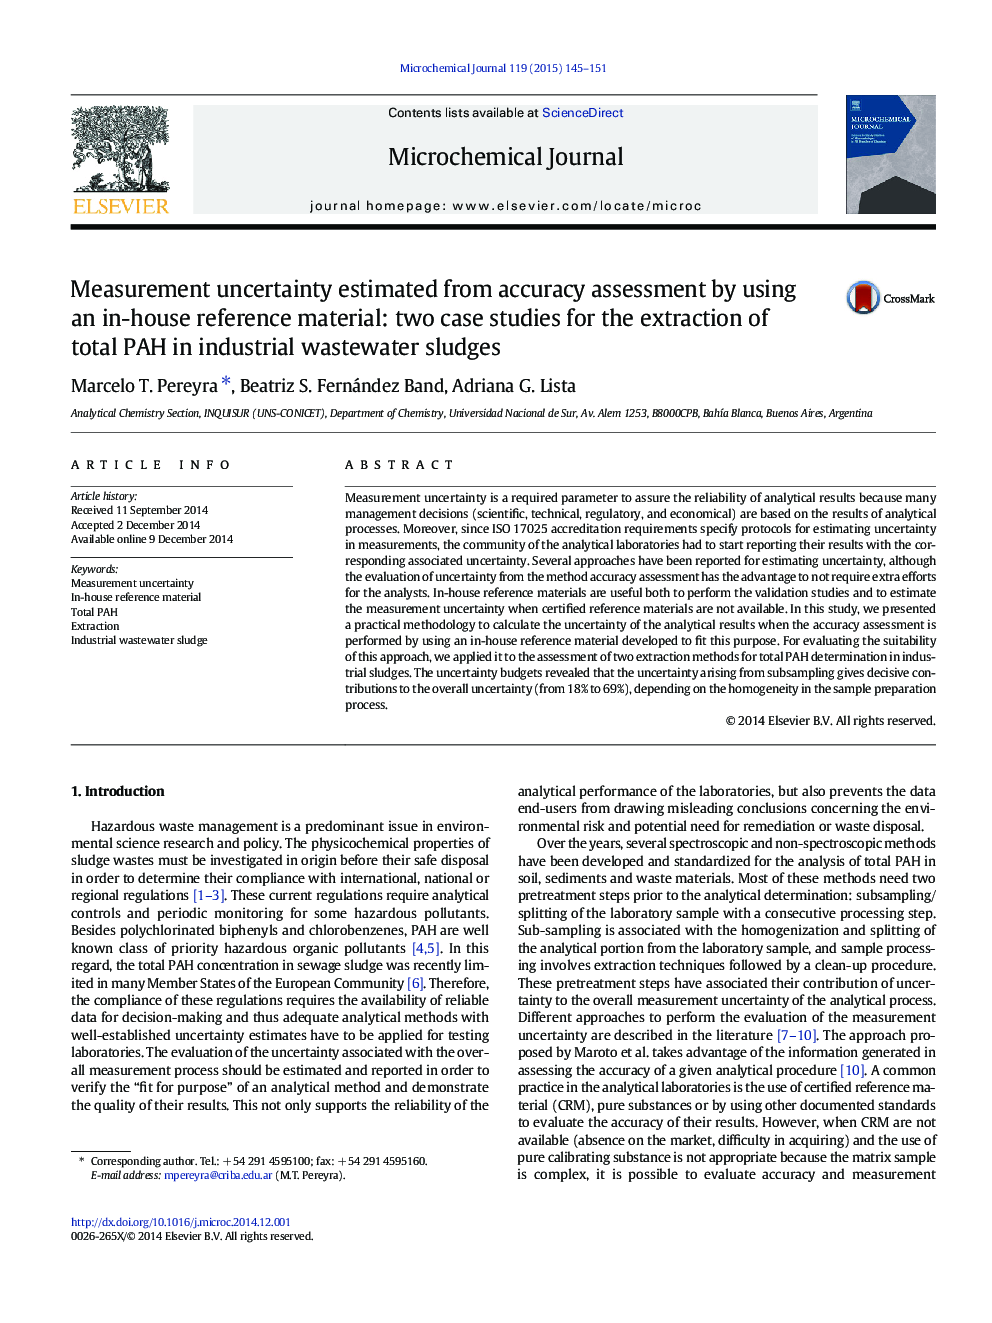 Measurement uncertainty estimated from accuracy assessment by using an in-house reference material: two case studies for the extraction of total PAH in industrial wastewater sludges